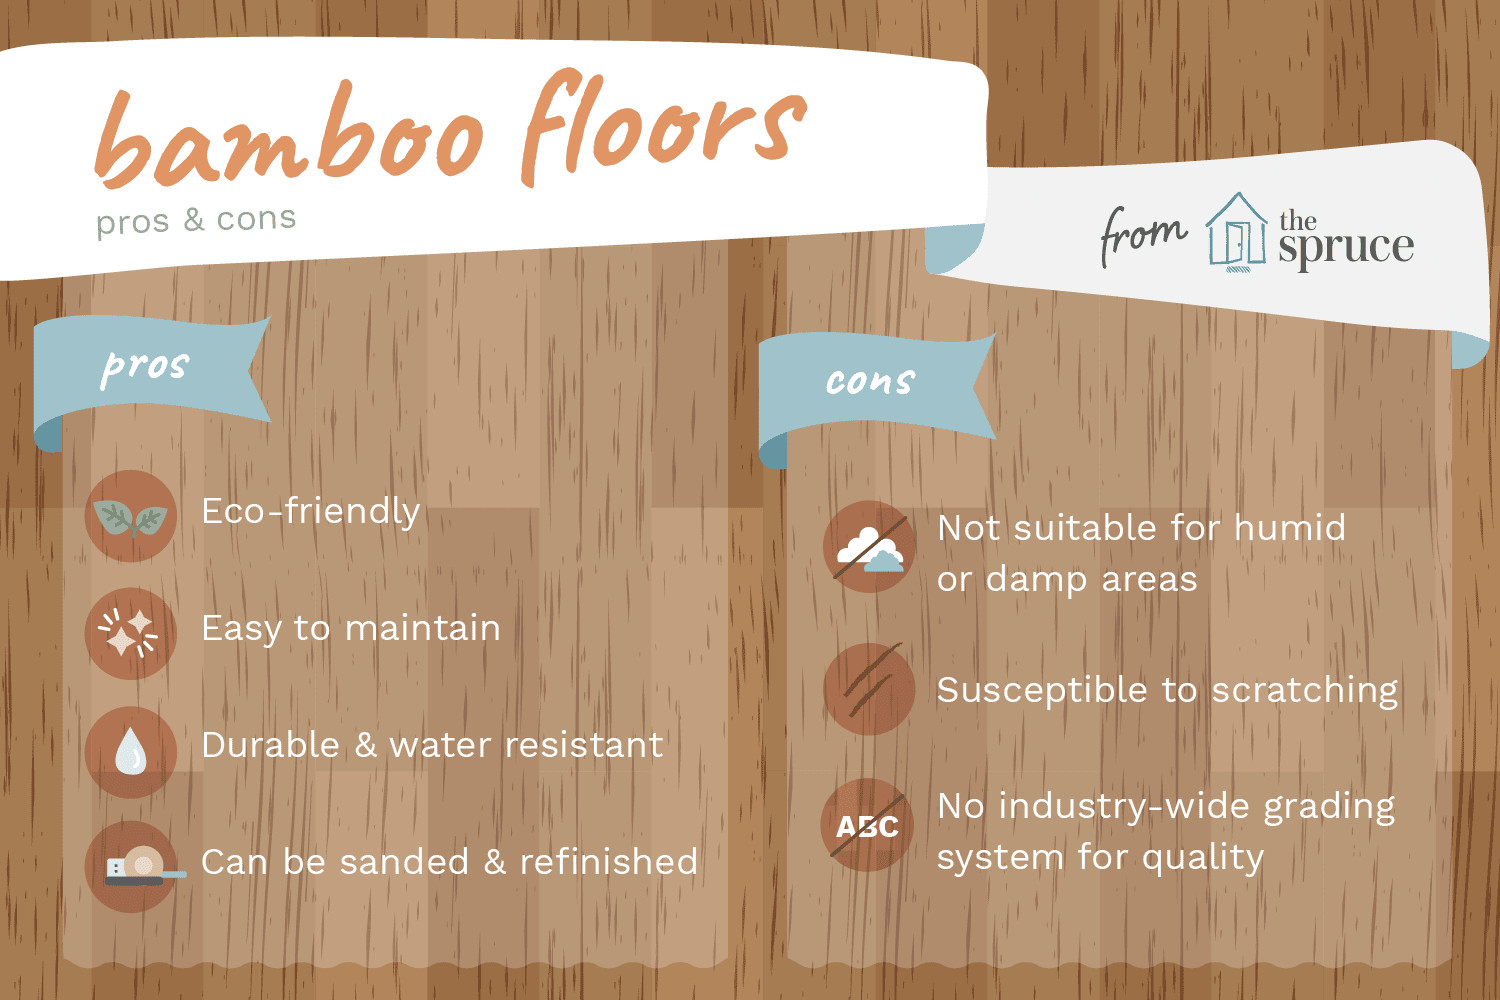 Refinishing Hardwood Floors In Sections Of the Advantages and Disadvantages Of Bamboo Flooring Intended for Benefits and Drawbacks Of Bamboo Floors 1314694 V3 5b102fccff1b780036c0a4fa